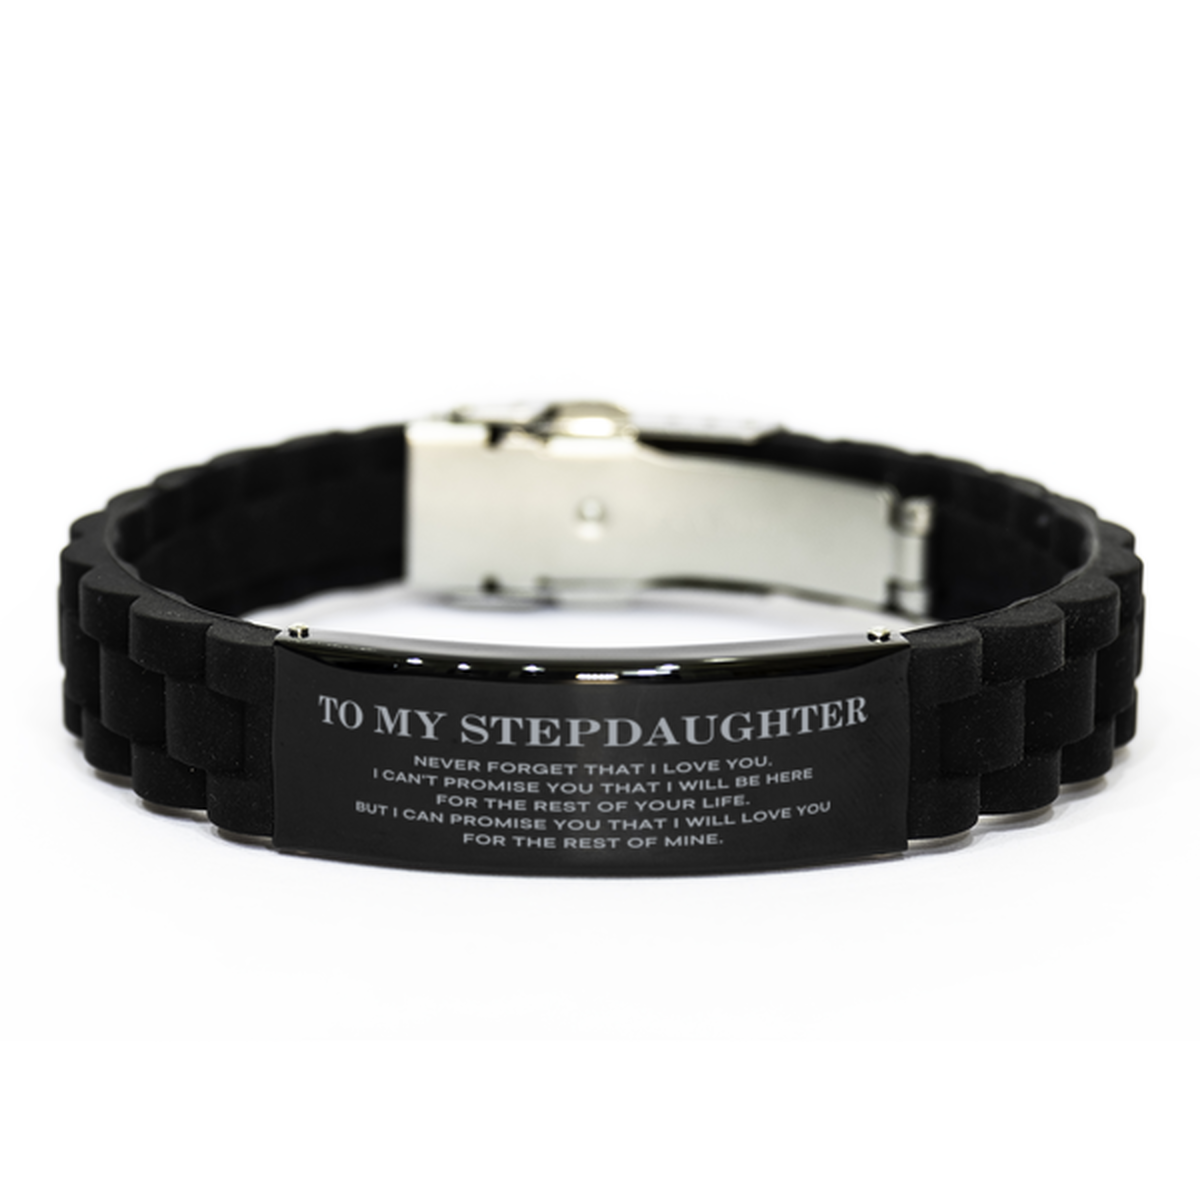 To My Stepdaughter Gifts, I will love you for the rest of mine, Love Stepdaughter Bracelet, Birthday Christmas Unique Black Glidelock Clasp Bracelet For Stepdaughter